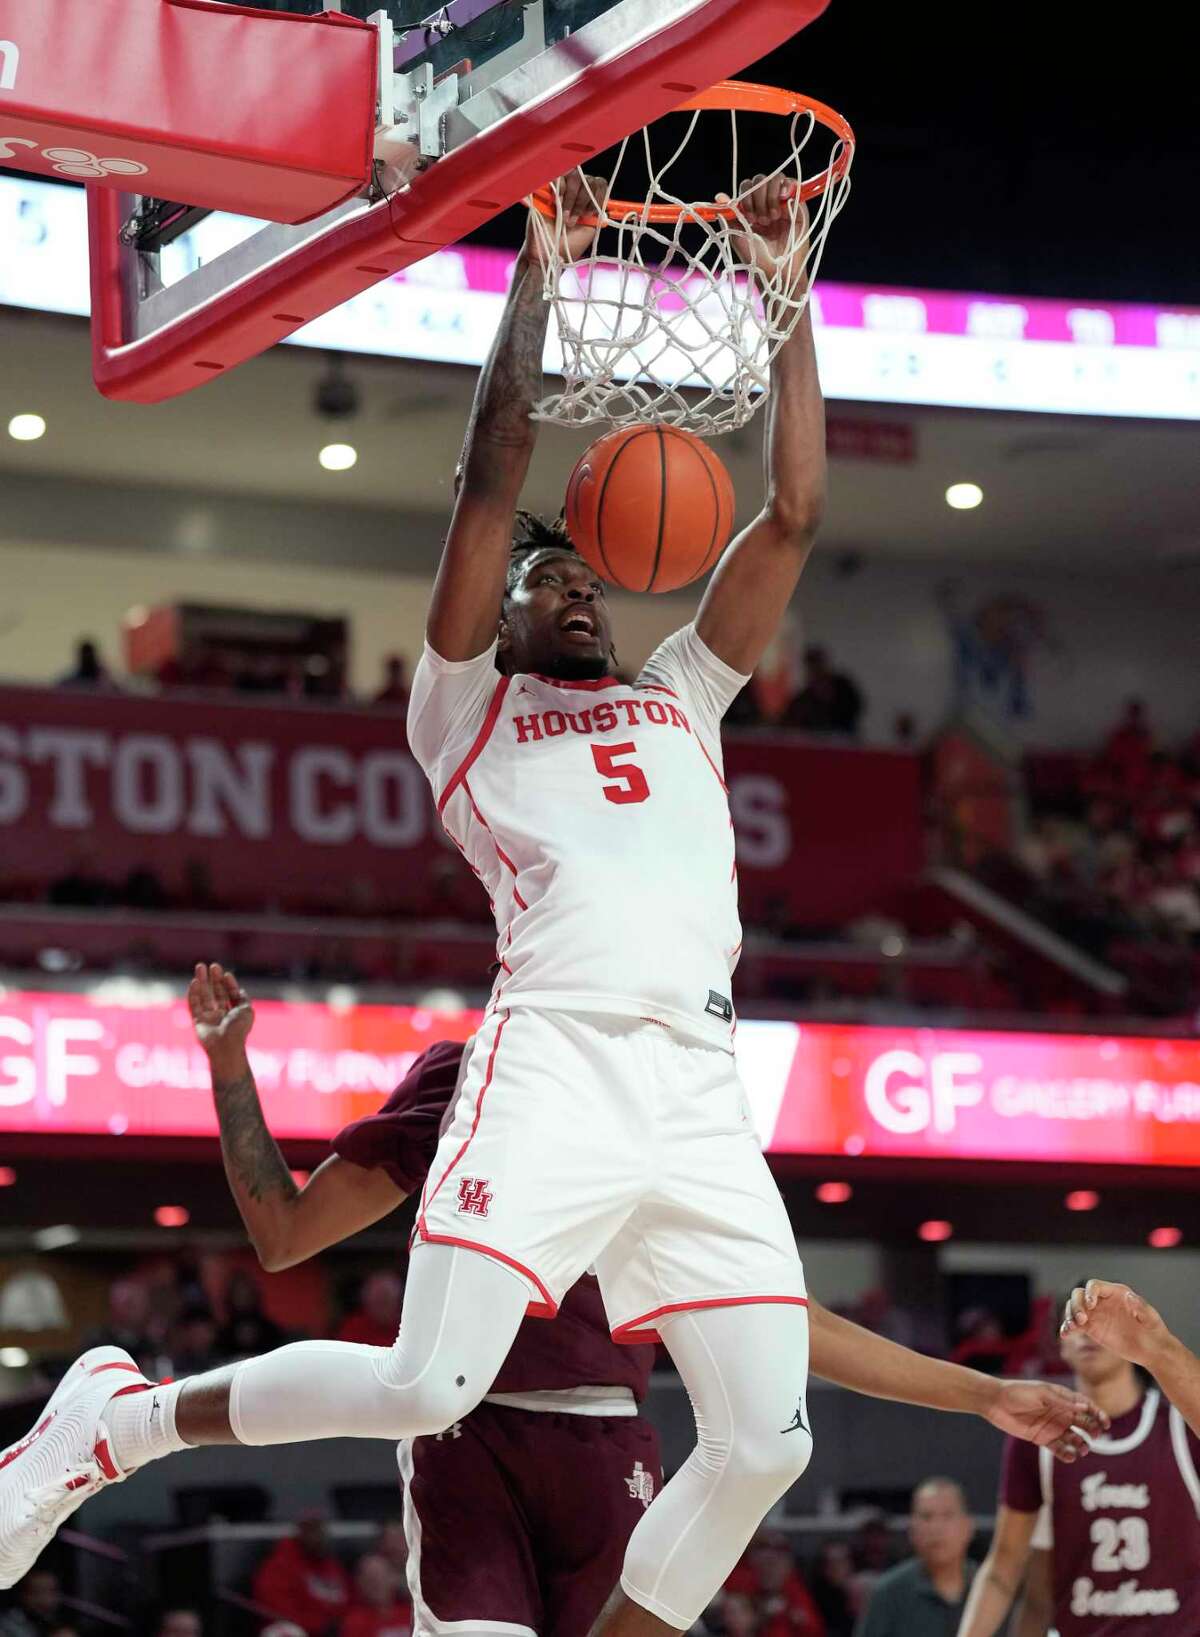 Houston Cougars forward Ja'Vier Francis (5) dunks the ball during the second half of a NCAA men’s basketball game at Fertita Center on Wednesday, Nov. 16, 2022 in Houston.